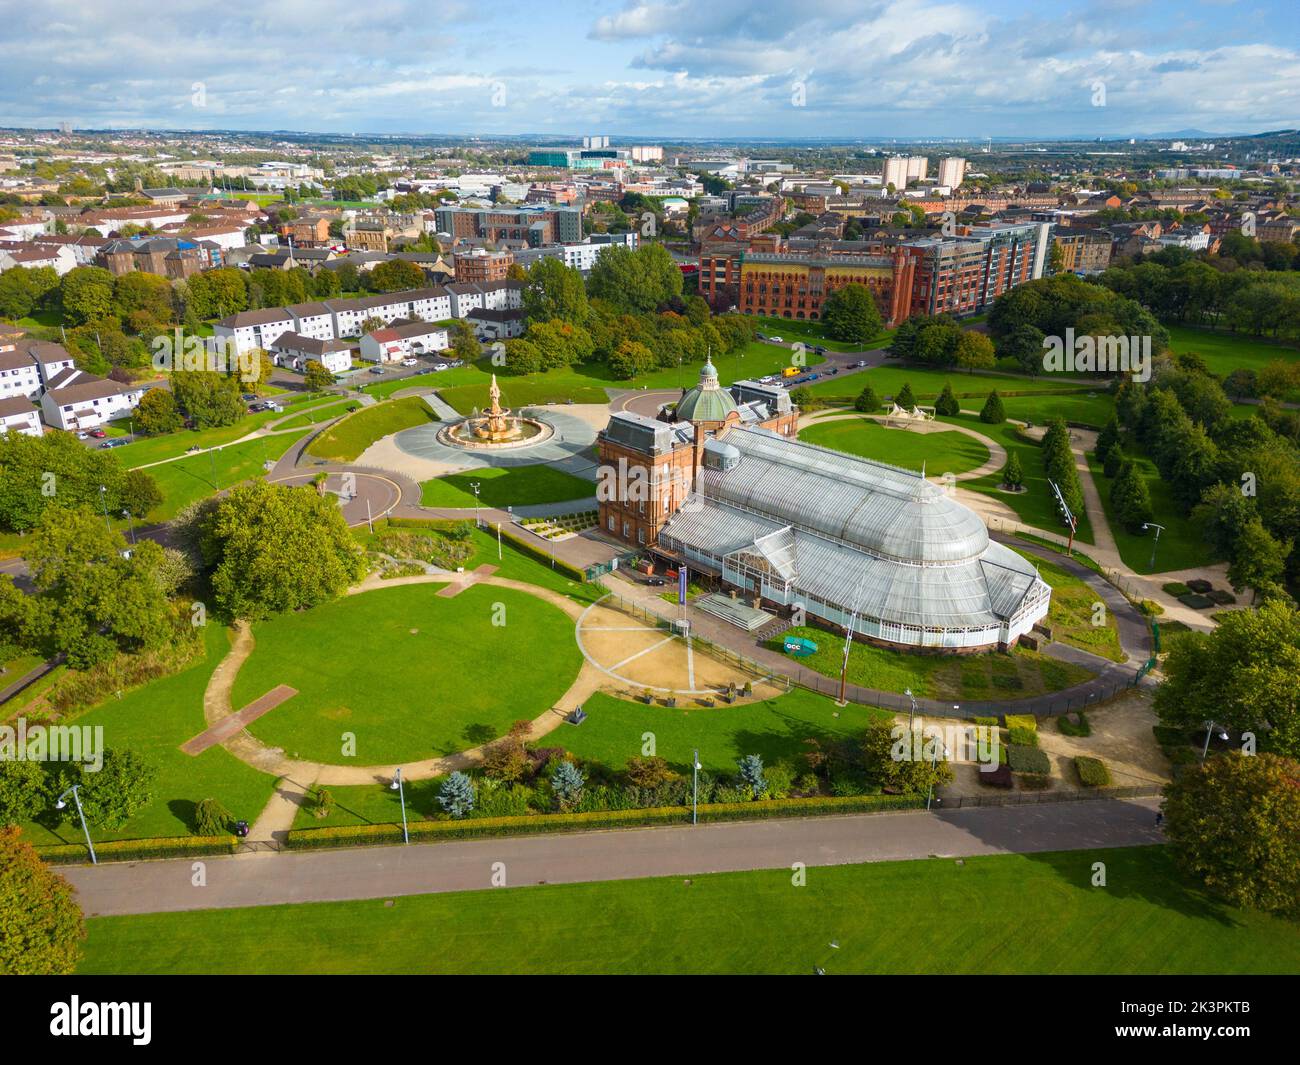 Aerial view of Peoples Palace and Winter Gardens on Glasgow Green park  in Glasgow, Scotland, UK Stock Photo